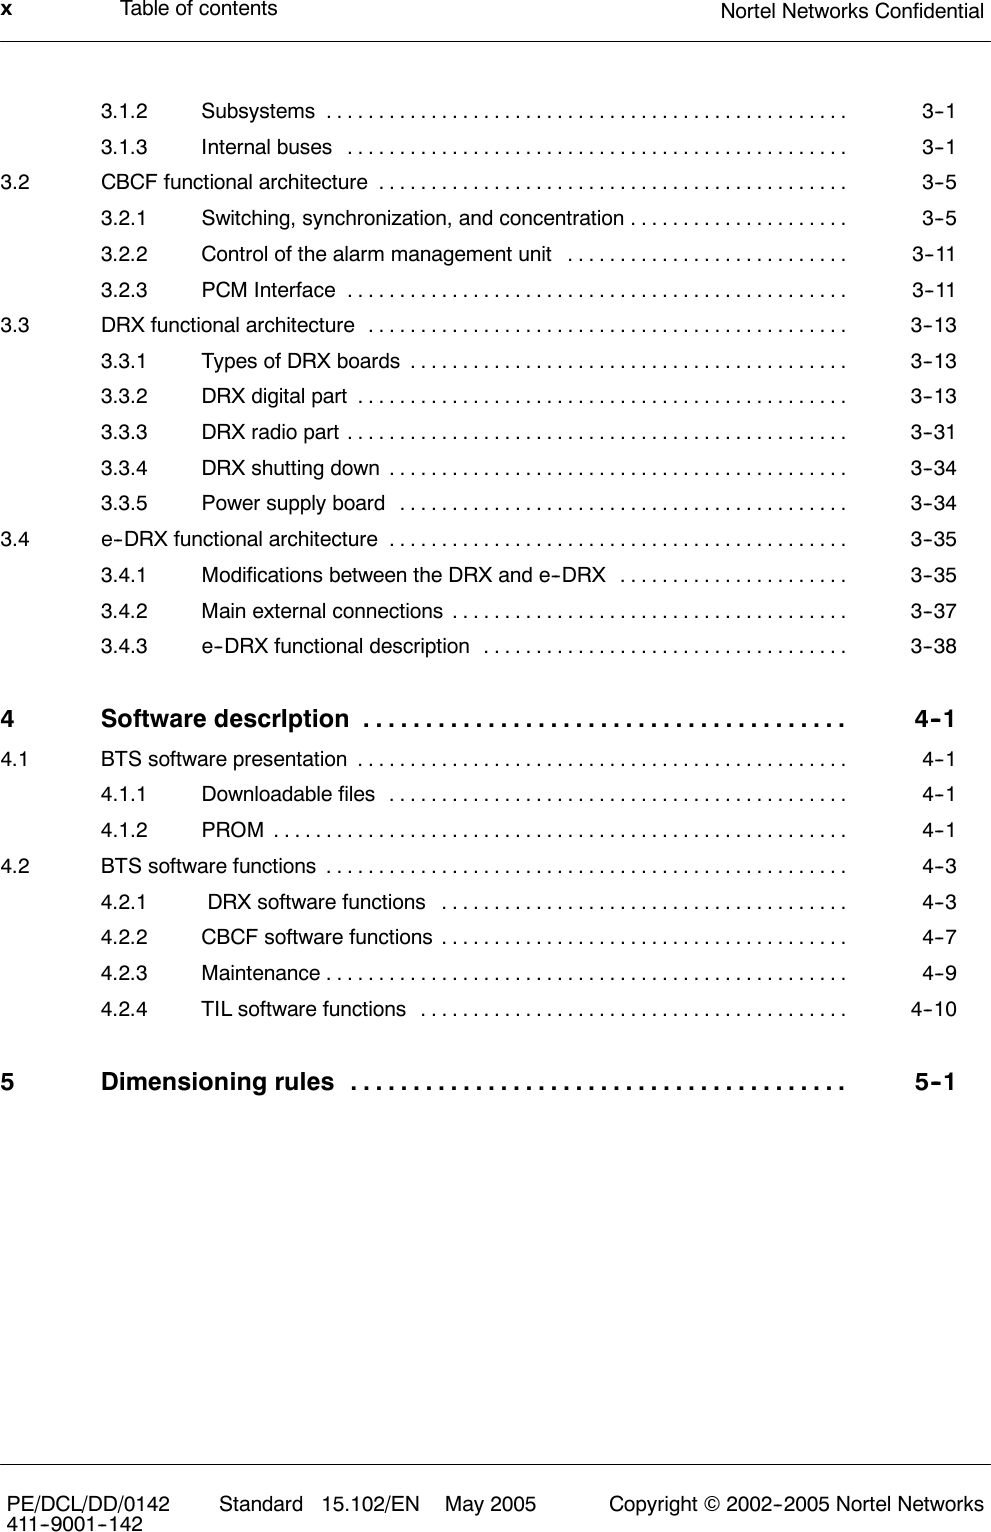 Table of contents Nortel Networks ConfidentialxPE/DCL/DD/0142411--9001--142 Standard 15.102/EN May 2005 Copyright ©2002--2005 Nortel Networks3.1.2 Subsystems 3--1..................................................3.1.3 Internal buses 3--1................................................3.2 CBCF functional architecture 3--5.............................................3.2.1 Switching, synchronization, and concentration 3--5.....................3.2.2 Control of the alarm management unit 3--11...........................3.2.3 PCM Interface 3--11................................................3.3 DRX functional architecture 3--13..............................................3.3.1 Types of DRX boards 3--13..........................................3.3.2 DRX digital part 3--13...............................................3.3.3 DRX radio part 3--31................................................3.3.4 DRX shutting down 3--34............................................3.3.5 Power supply board 3--34...........................................3.4 e--DRX functional architecture 3--35............................................3.4.1 Modifications between the DRX and e--DRX 3--35......................3.4.2 Main external connections 3--37......................................3.4.3 e--DRX functional description 3--38...................................4 Software descrIption 4--1.......................................4.1 BTS software presentation 4--1...............................................4.1.1 Downloadable files 4--1............................................4.1.2 PROM 4--1.......................................................4.2 BTS software functions 4--3..................................................4.2.1 DRX software functions 4--3.......................................4.2.2 CBCF software functions 4--7.......................................4.2.3 Maintenance 4--9..................................................4.2.4 TIL software functions 4--10.........................................5 Dimensioning rules 5--1........................................